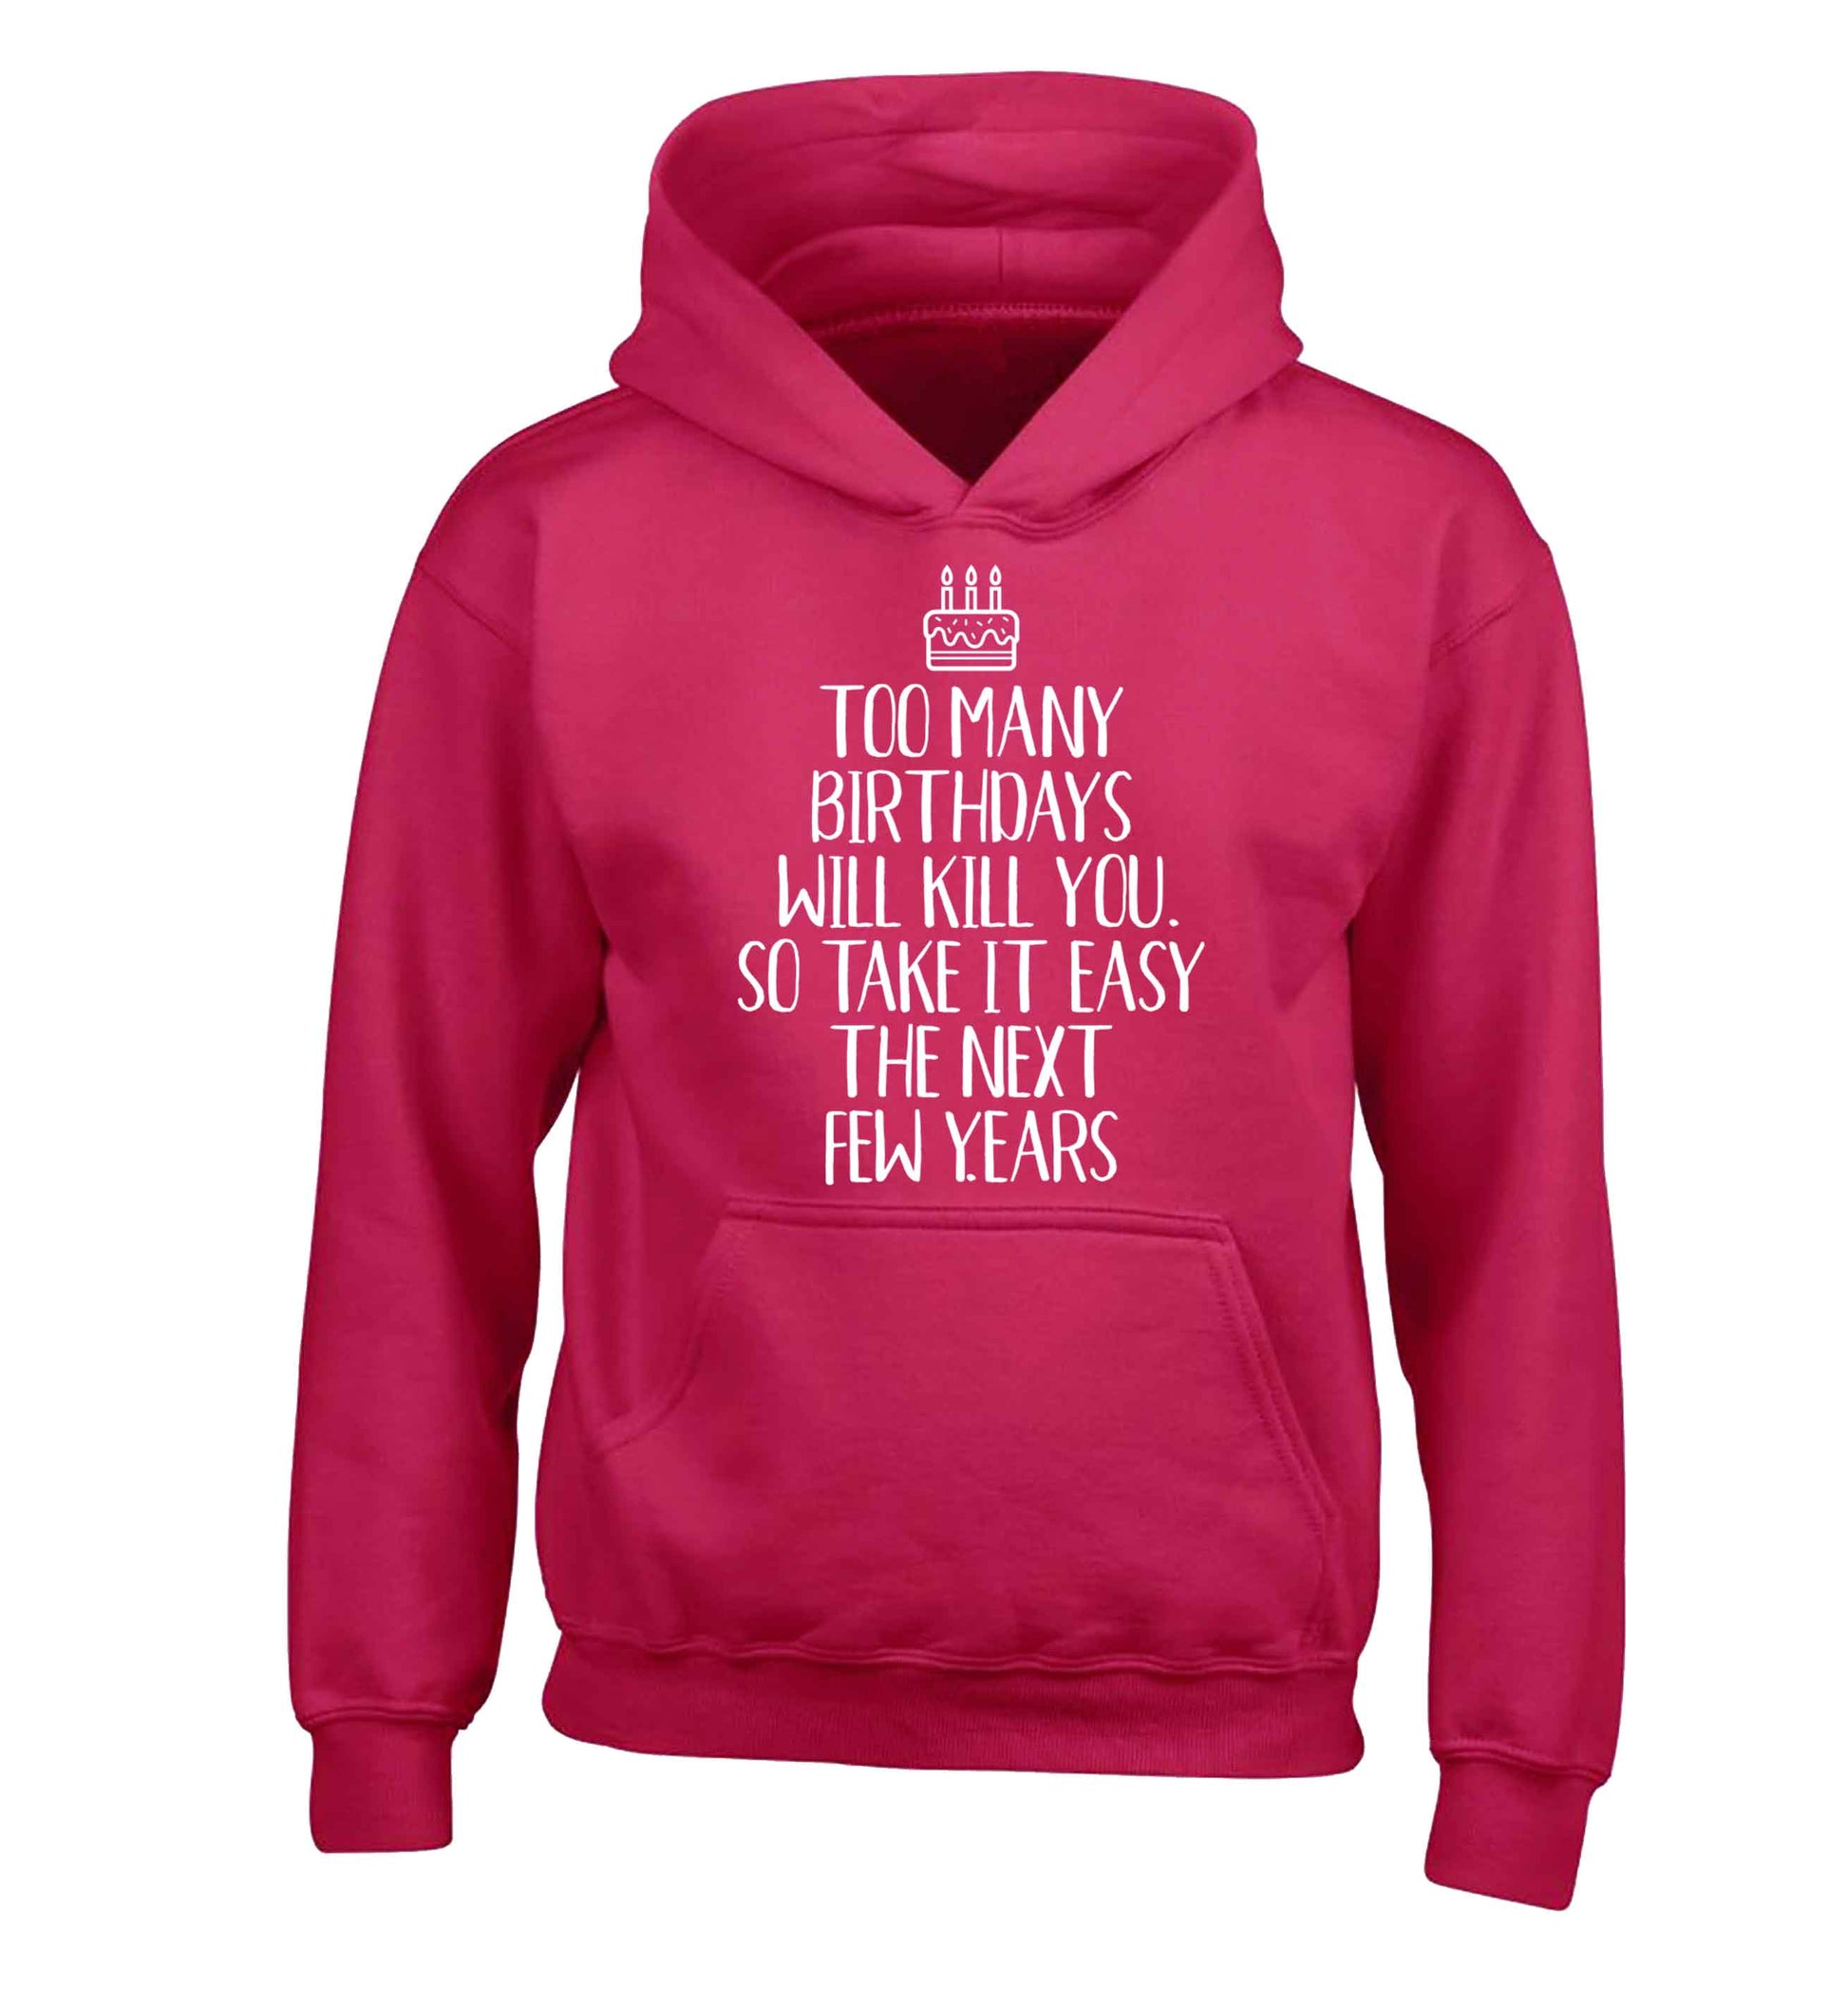 Too many birthdays will kill you so take it easy children's pink hoodie 12-13 Years